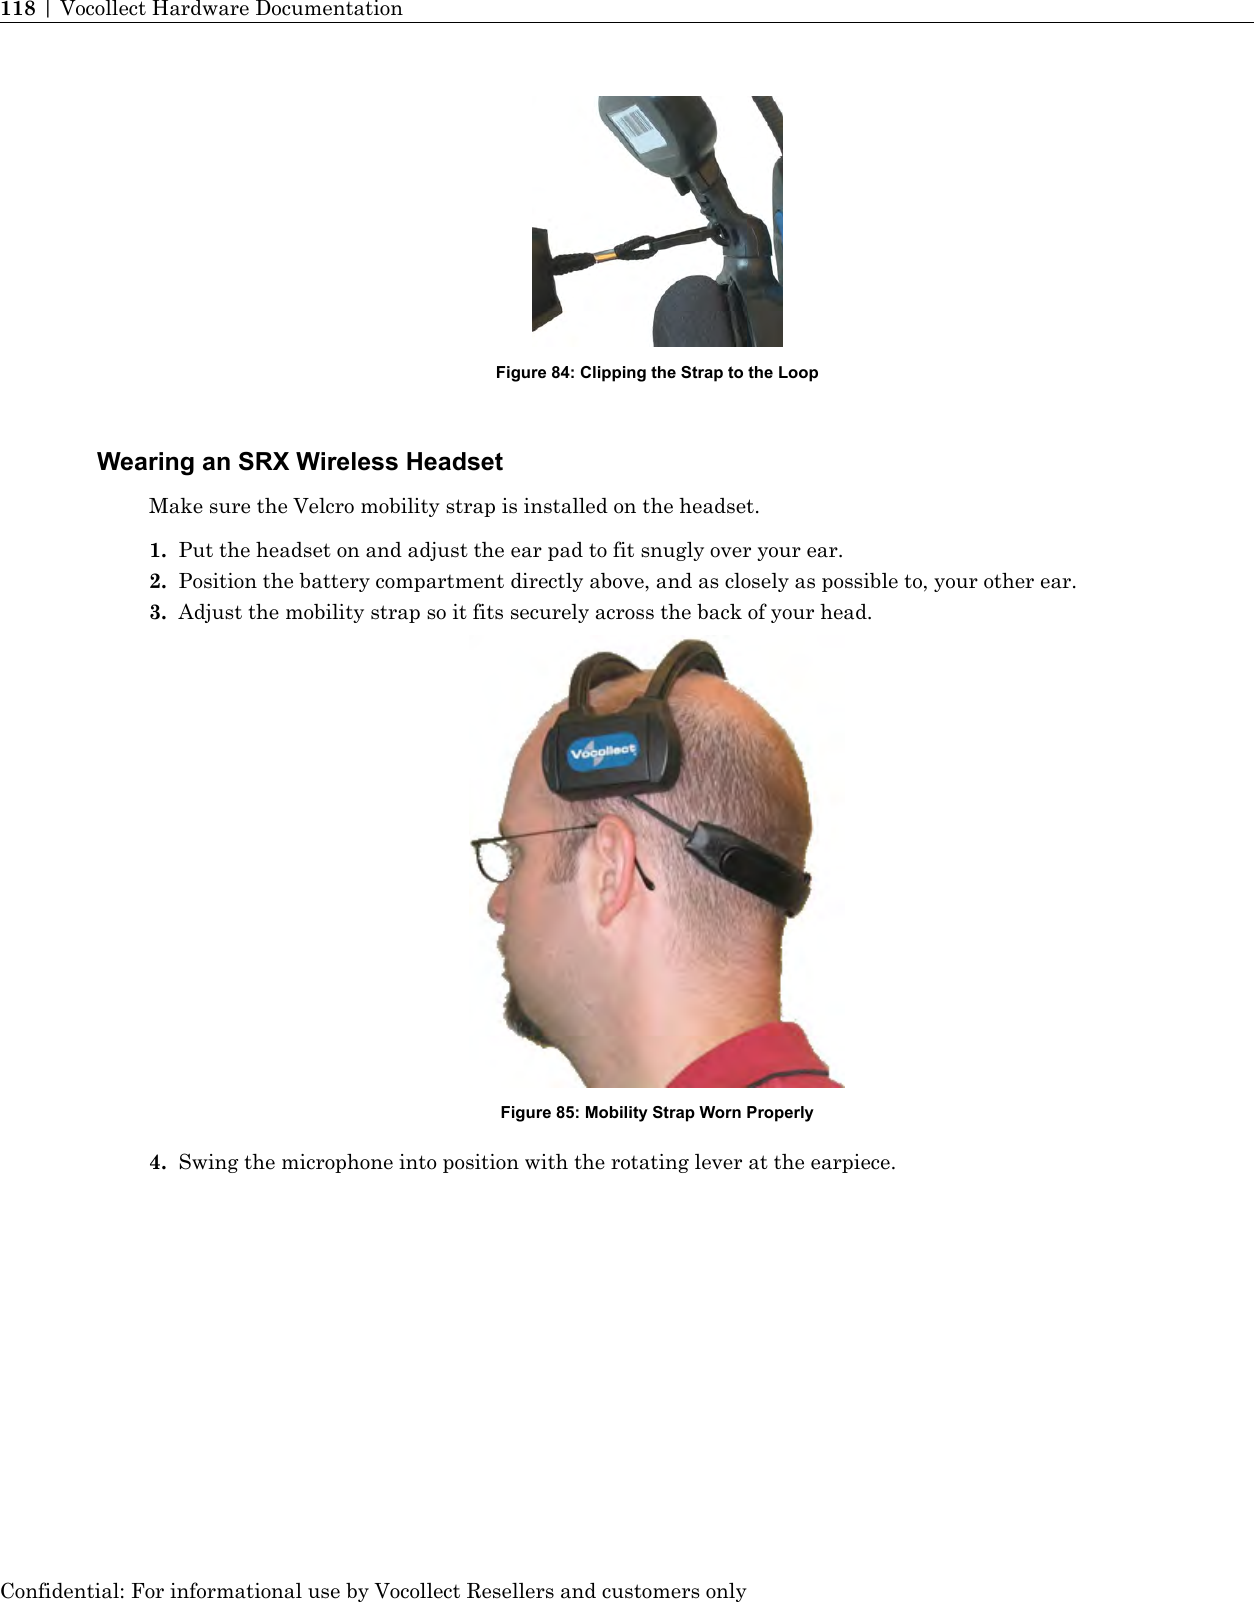 Figure 84: Clipping the Strap to the LoopWearing an SRX Wireless HeadsetMake sure the Velcro mobility strap is installed on the headset.1. Put the headset on and adjust the ear pad to fit snugly over your ear.2. Position the battery compartment directly above, and as closely as possible to, your other ear.3. Adjust the mobility strap so it fits securely across the back of your head.Figure 85: Mobility Strap Worn Properly4. Swing the microphone into position with the rotating lever at the earpiece.Confidential: For informational use by Vocollect Resellers and customers only118 | Vocollect Hardware Documentation